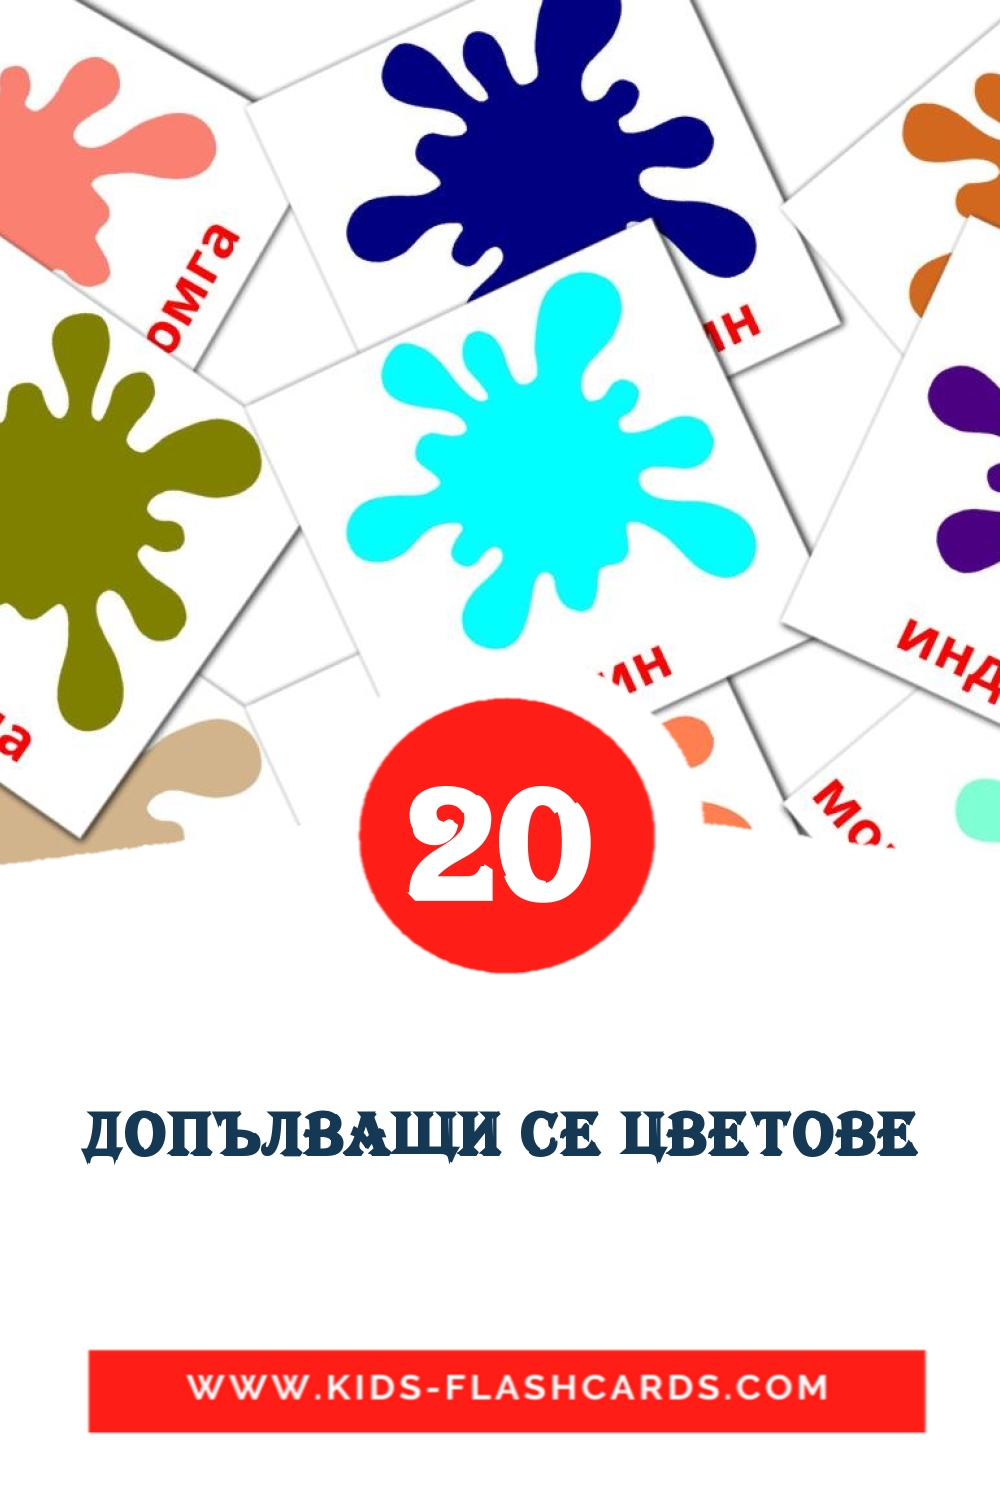 20 Допълващи се цветове Picture Cards for Kindergarden in bulgarian